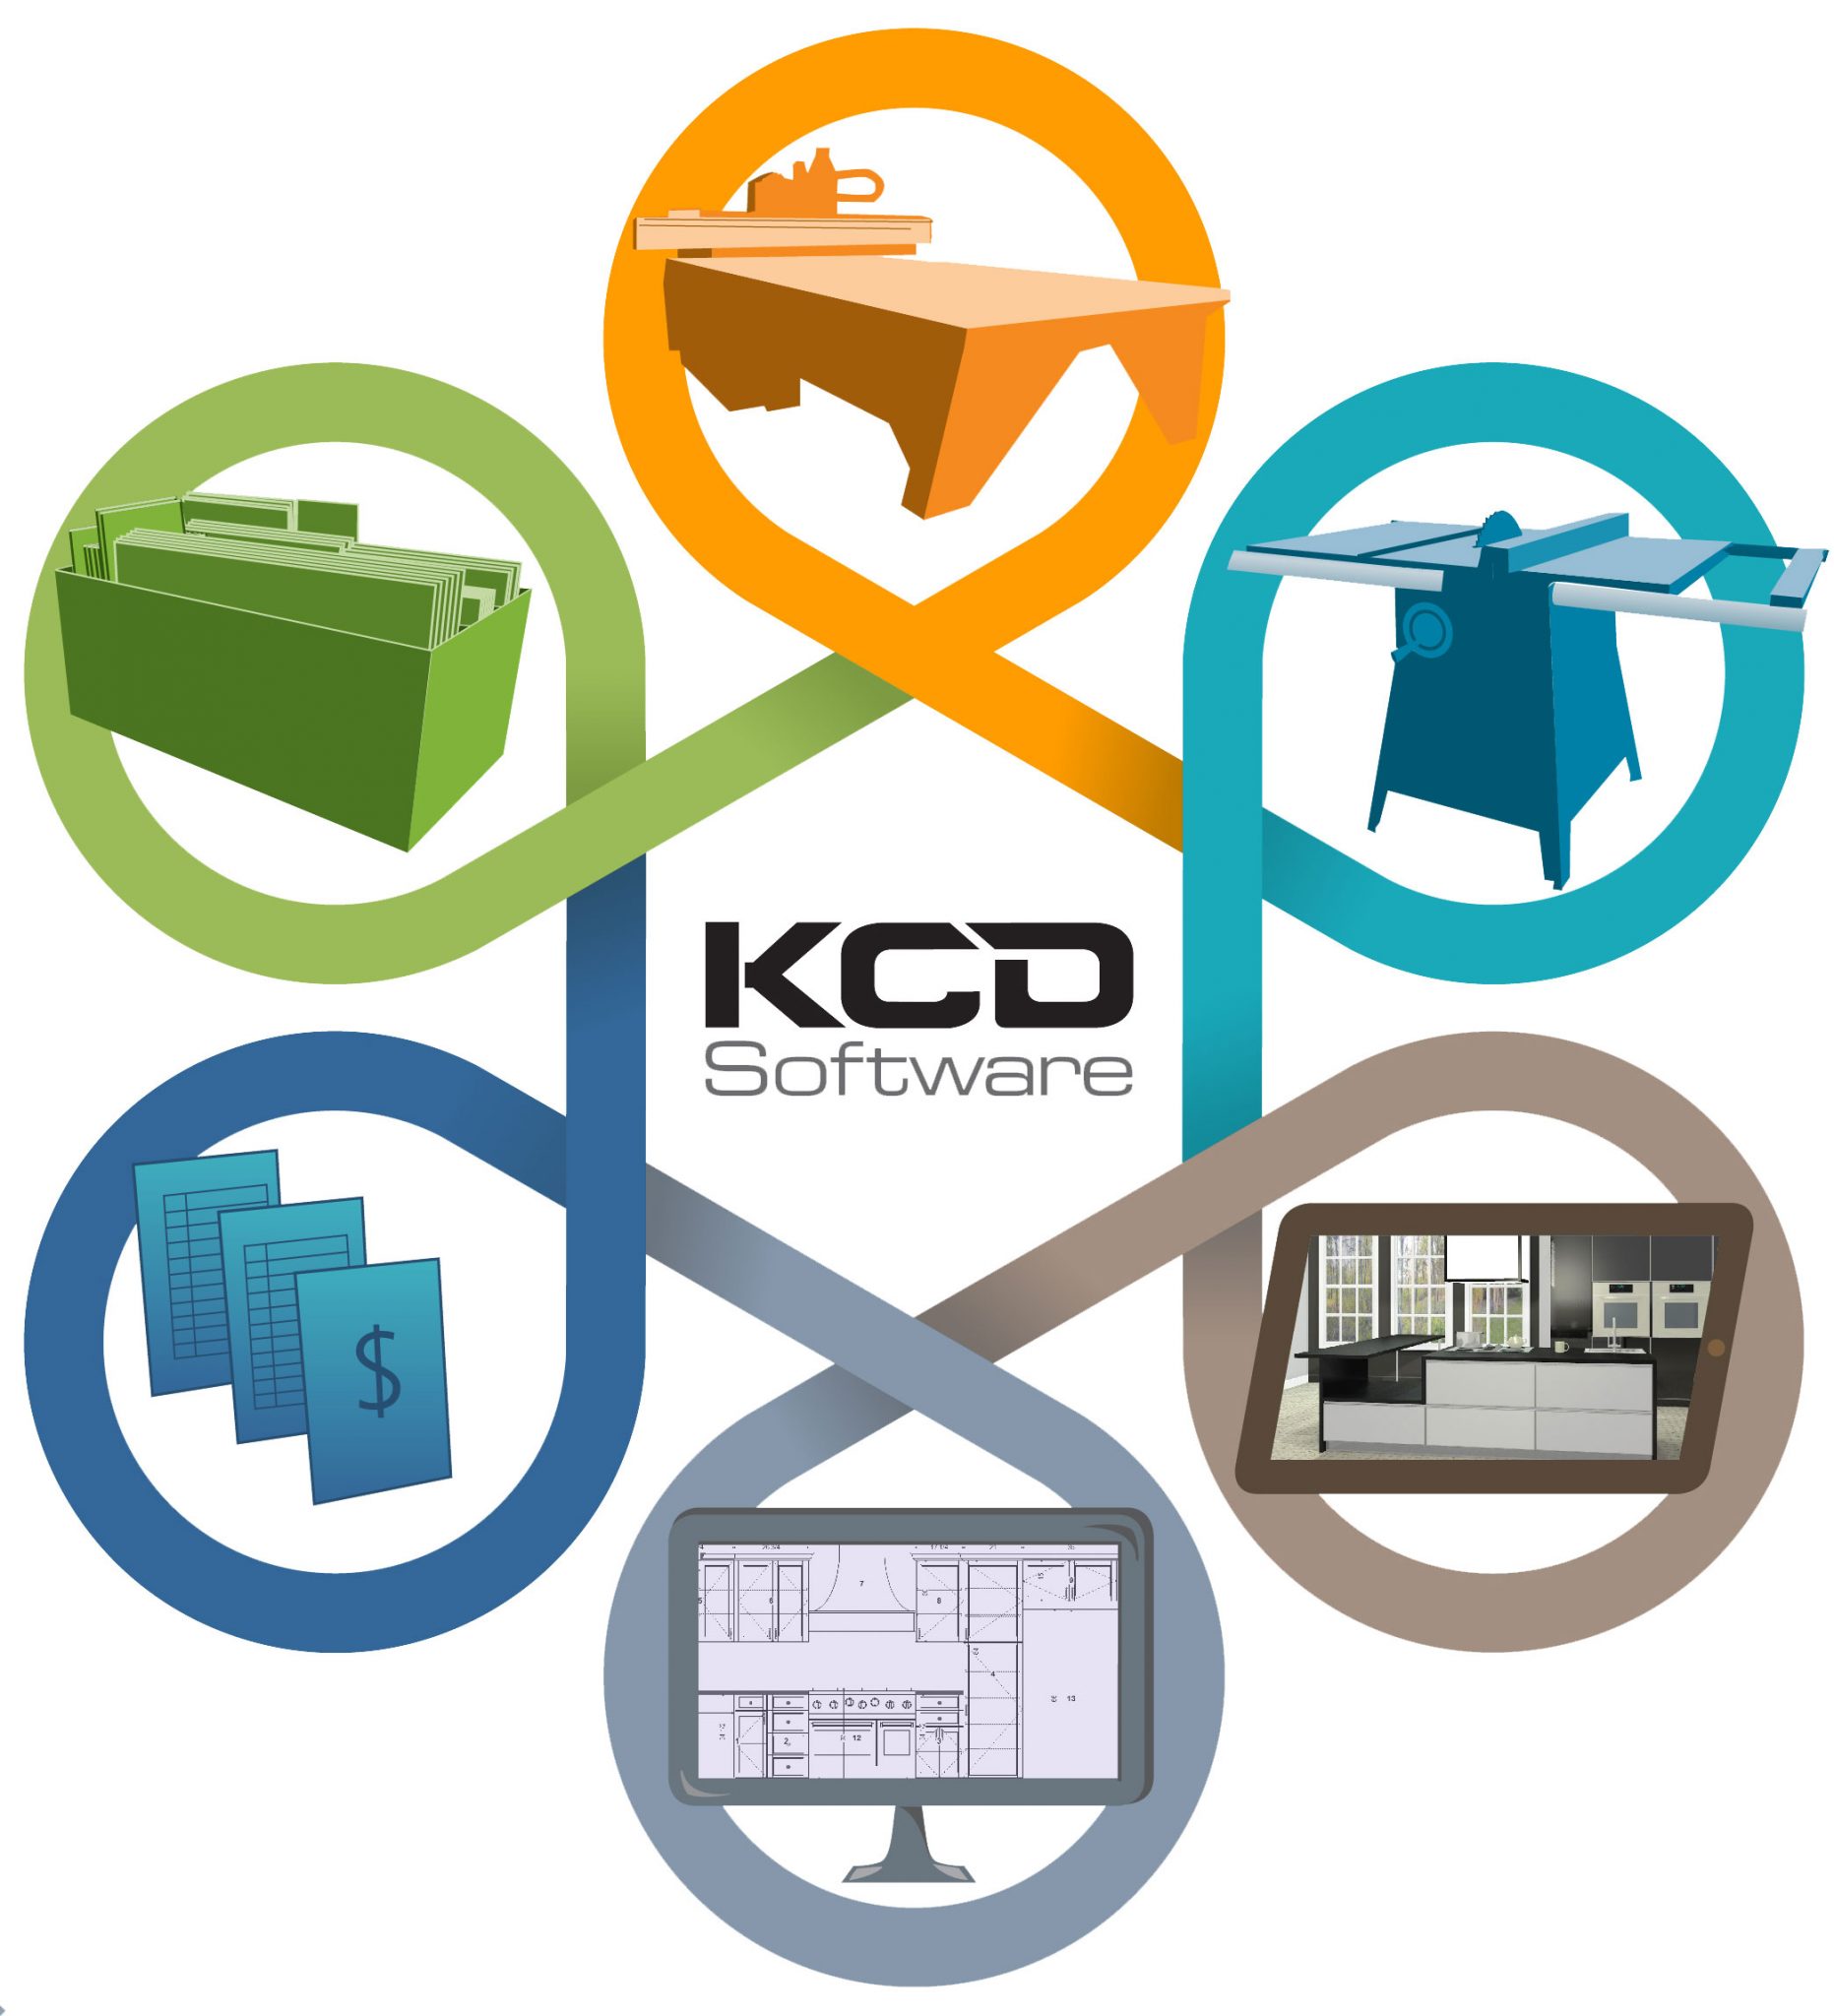 KCD-workflow-graphic-web